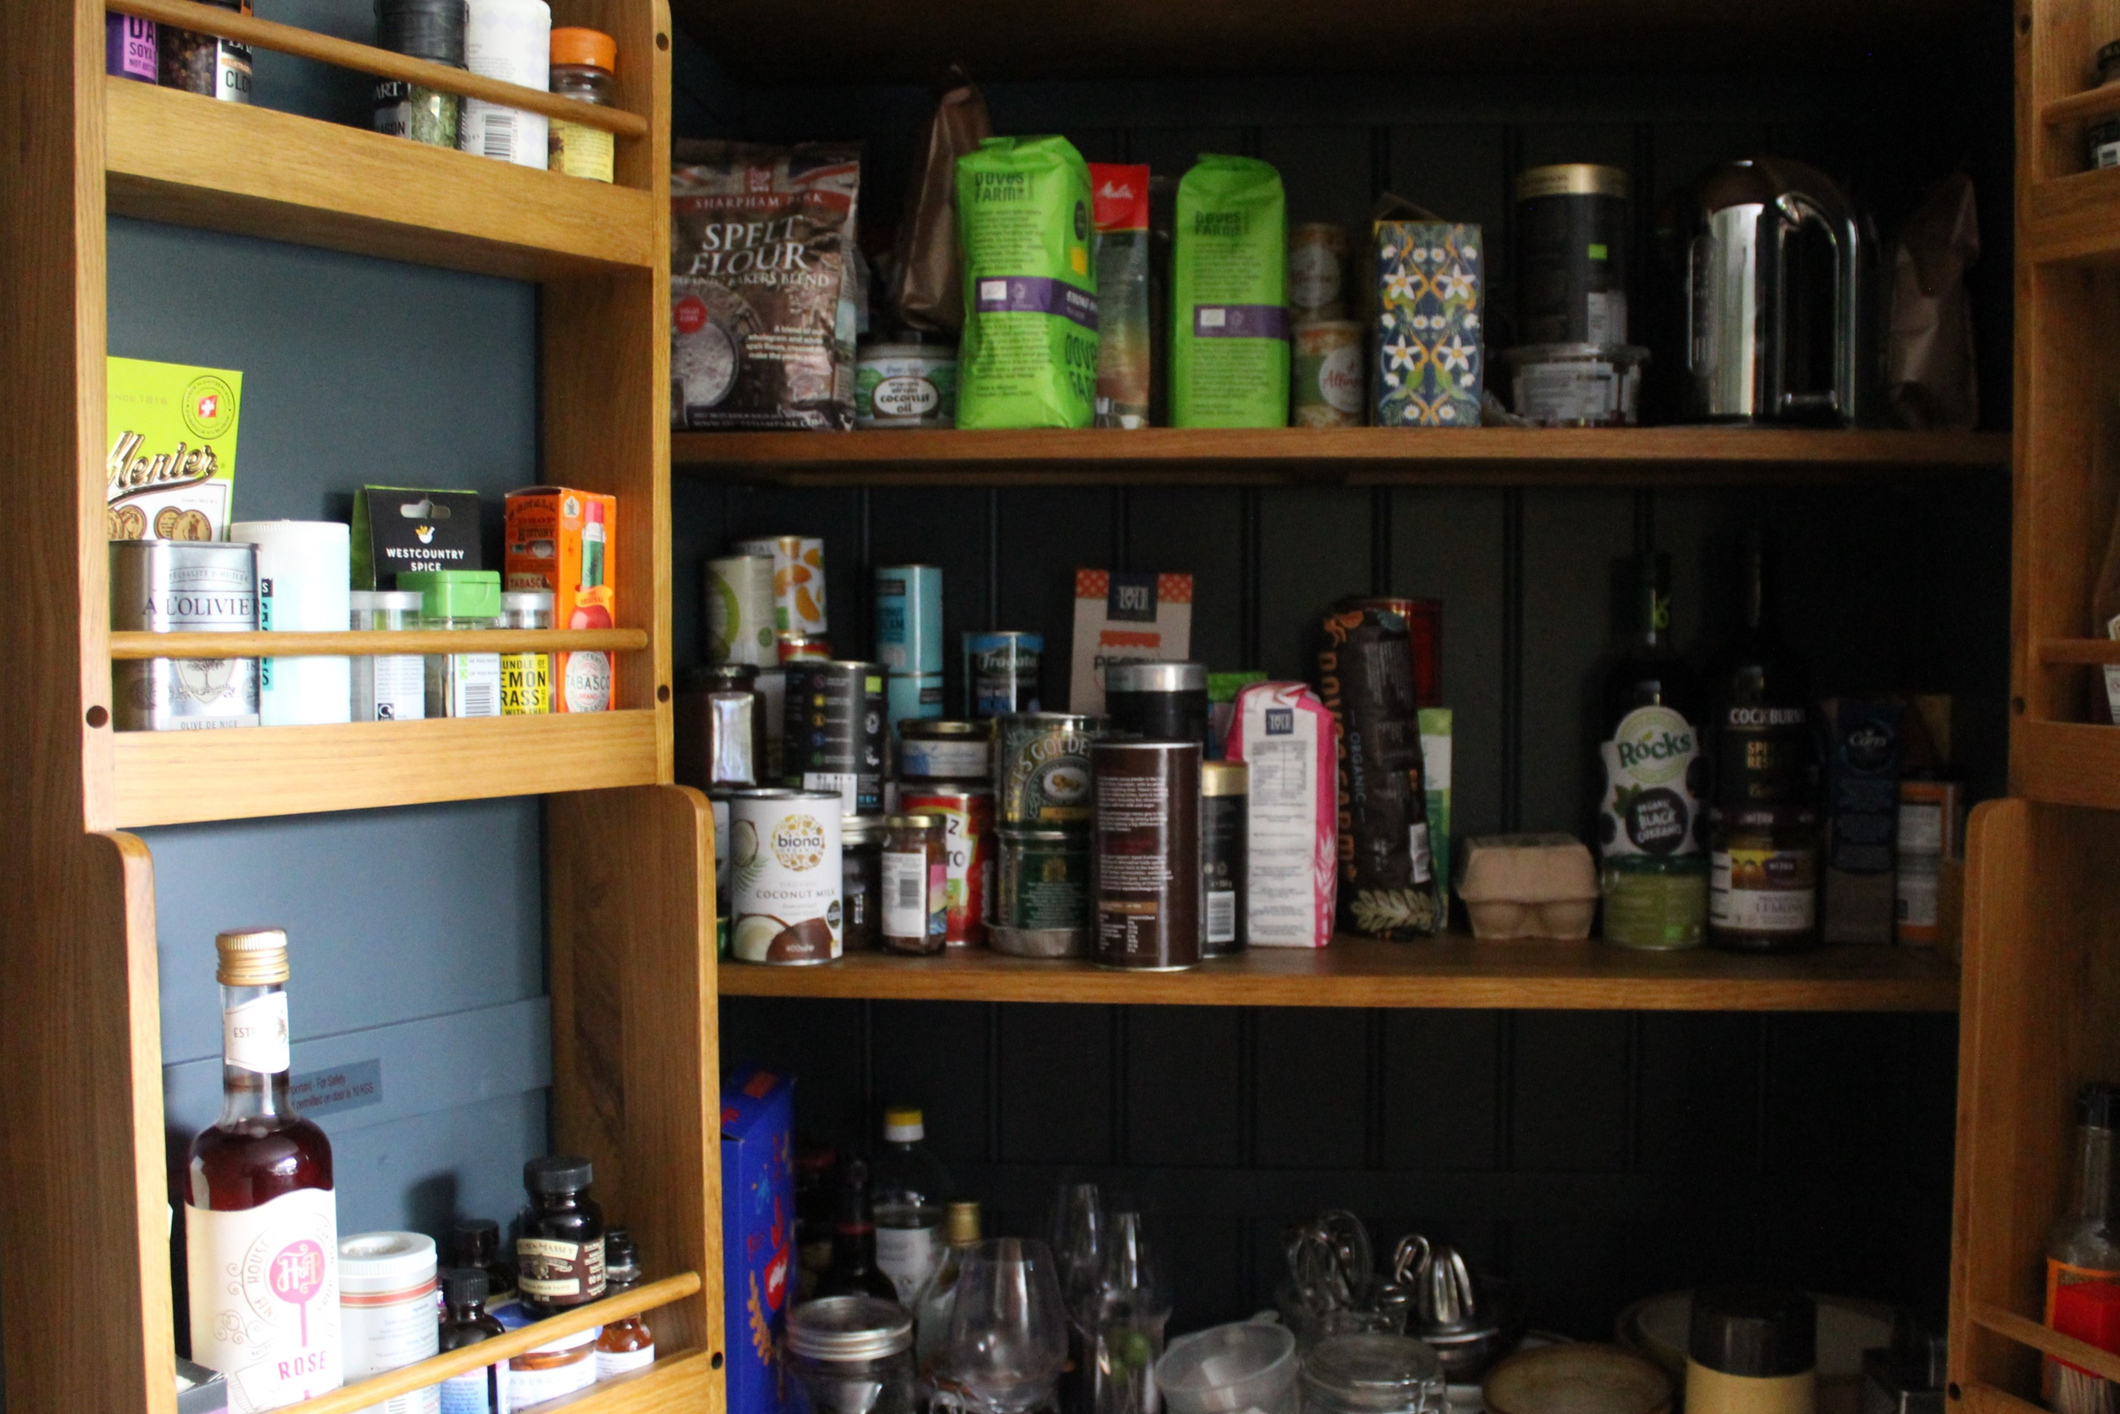 Storing Non-Food Items in the Pantry ~ Organize Your Kitchen